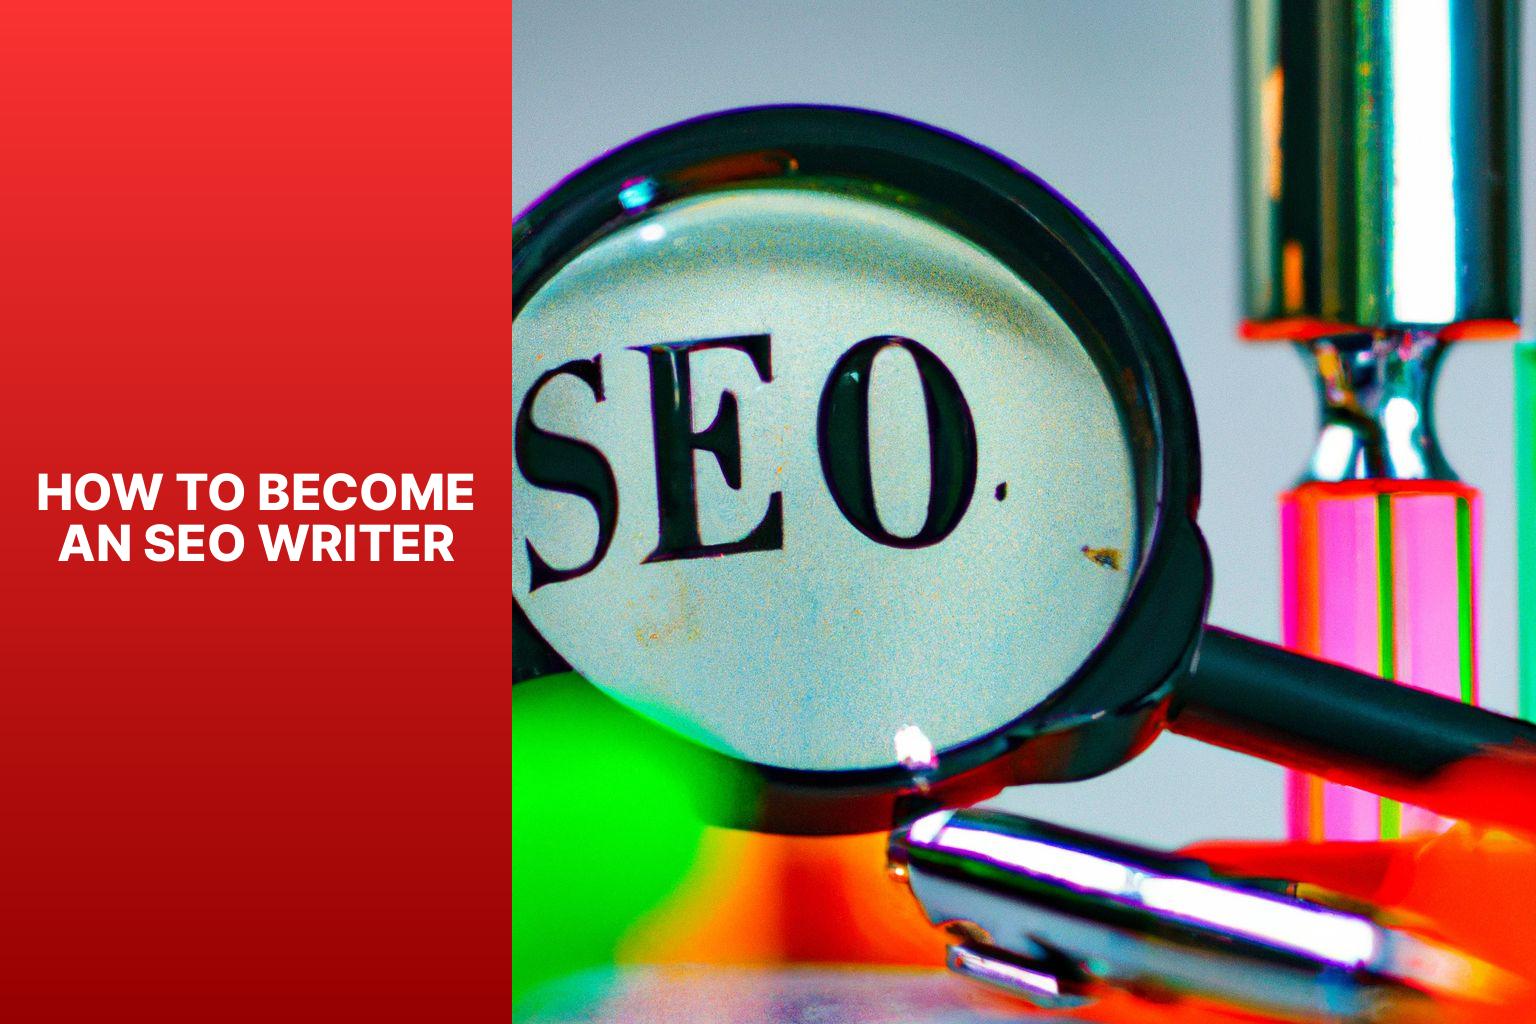 How to Become an SEO Writer